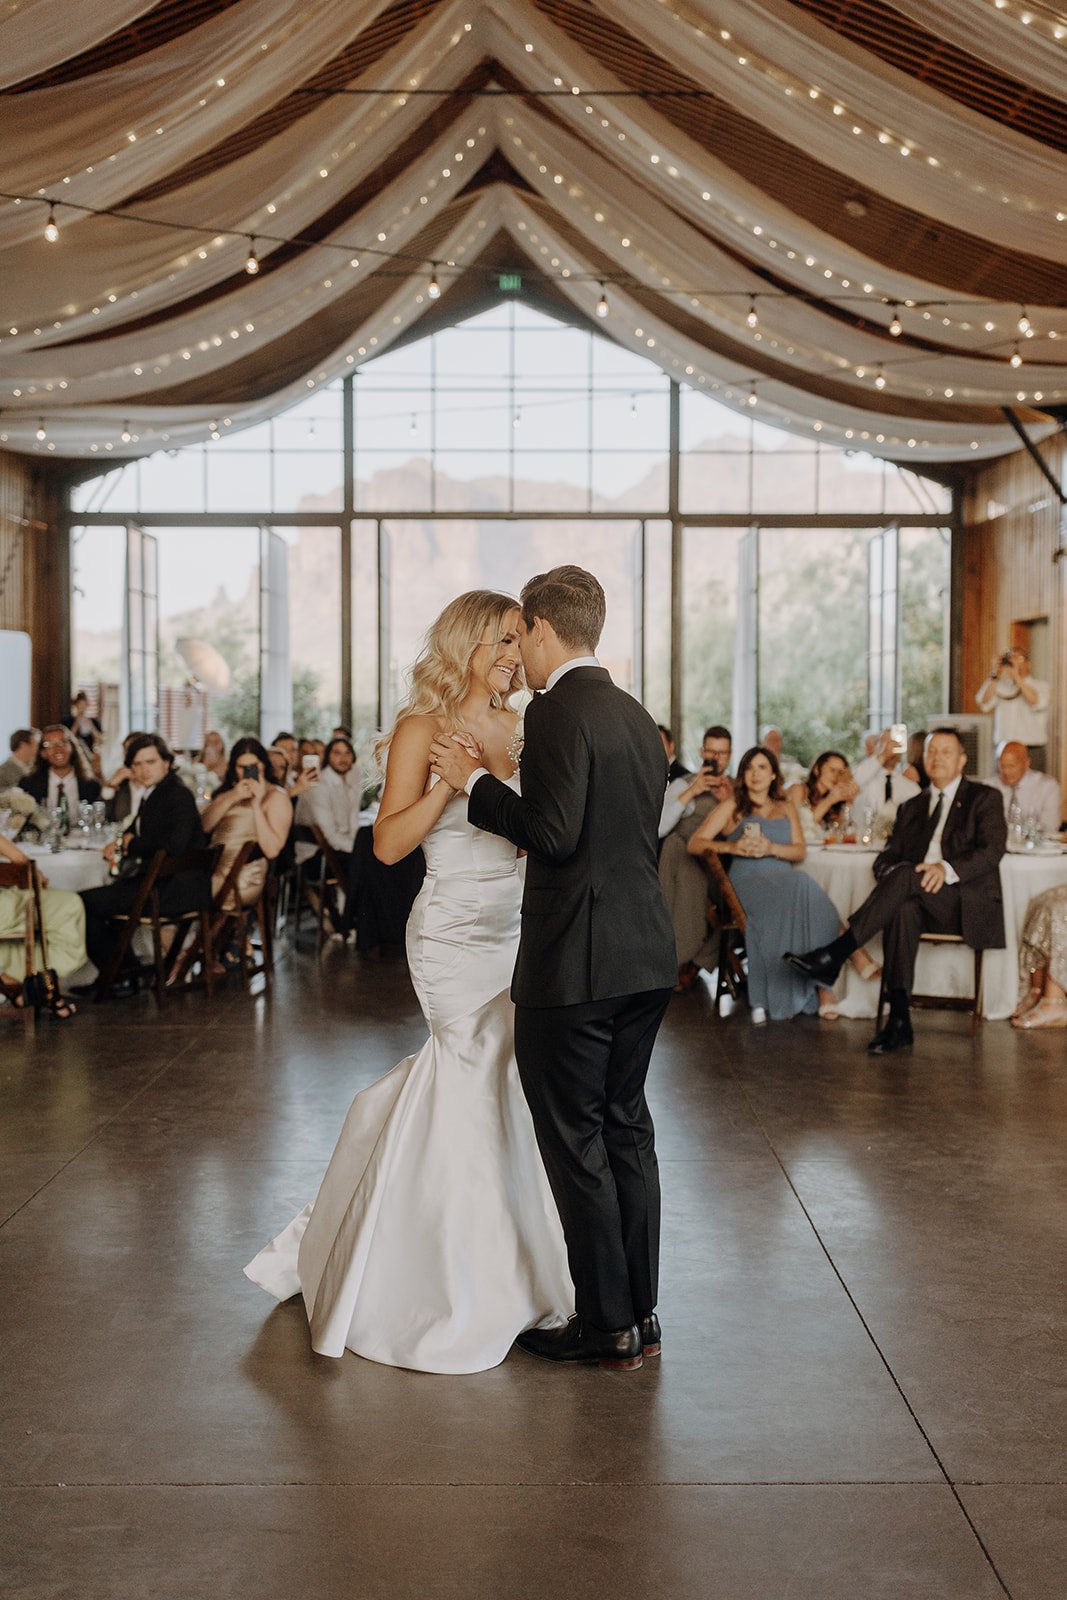 Bride and groom first dance at The Paseo desert wedding venue in Arizona